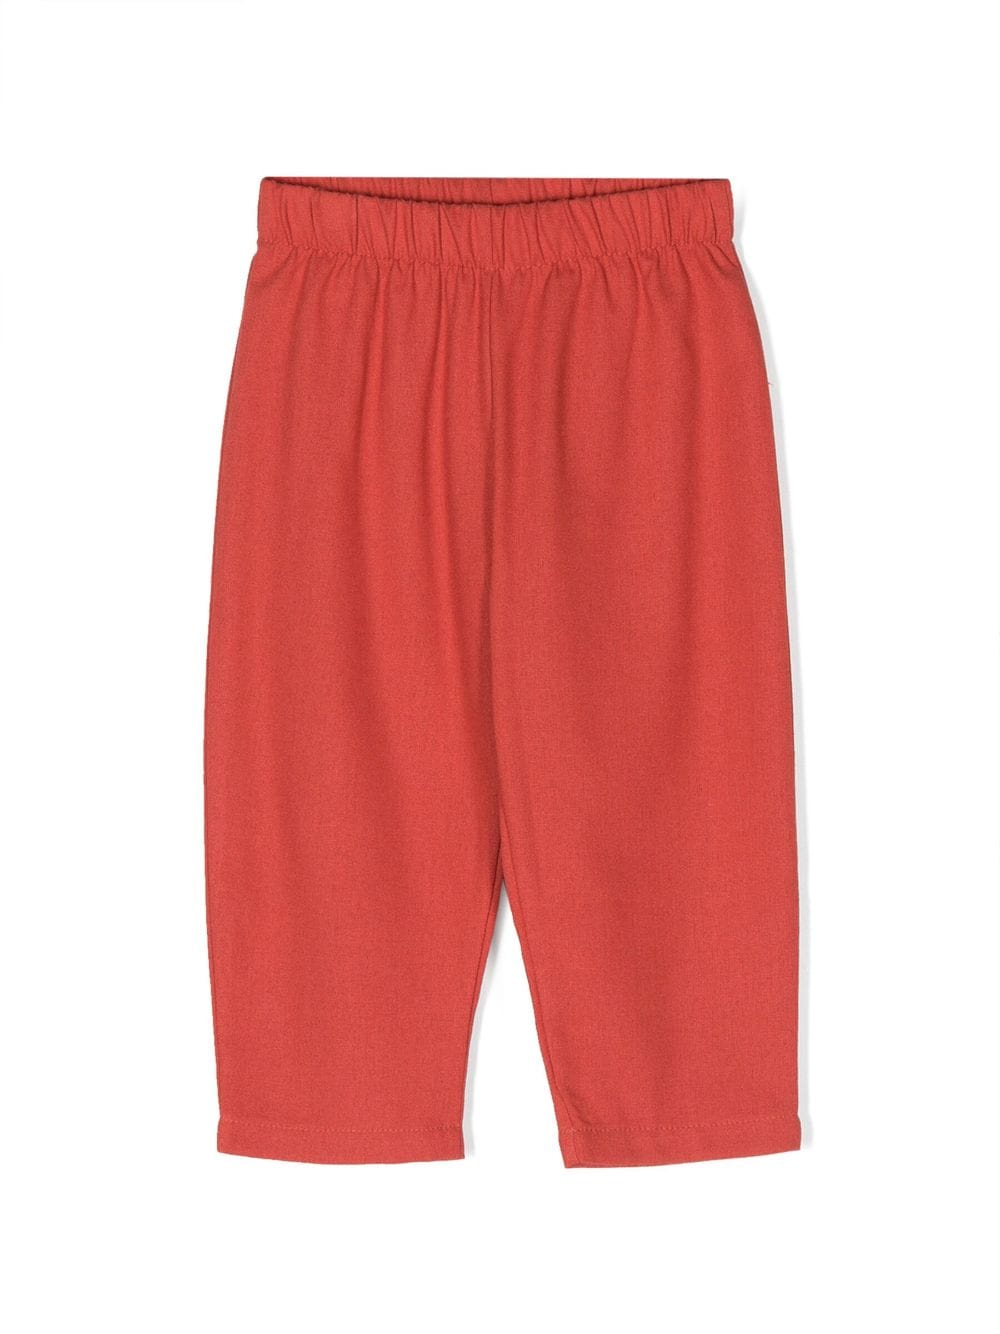 Studio Clay Babies' Red Air Trousers